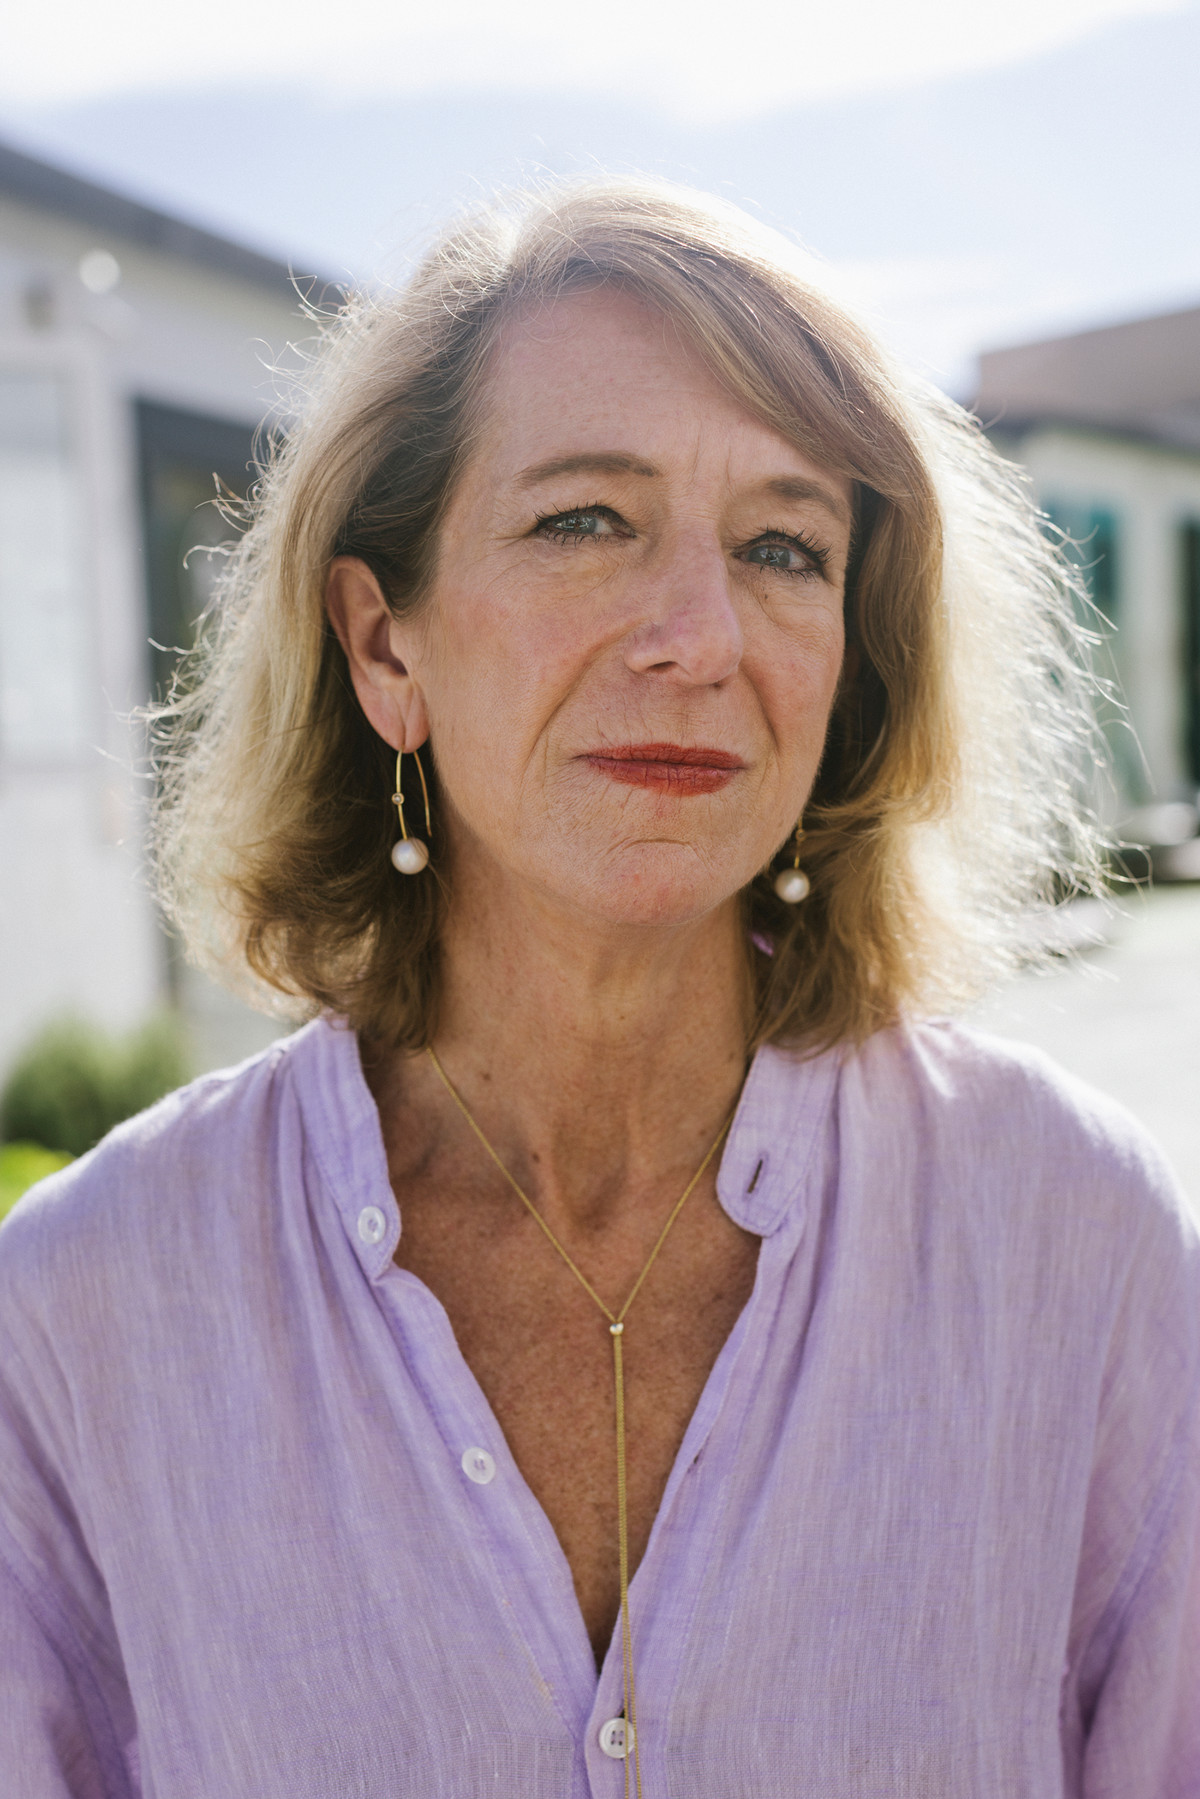 A middle-aged white woman with blond hair, wearing a lavender blouse and pearl earrings, looks into the camera.